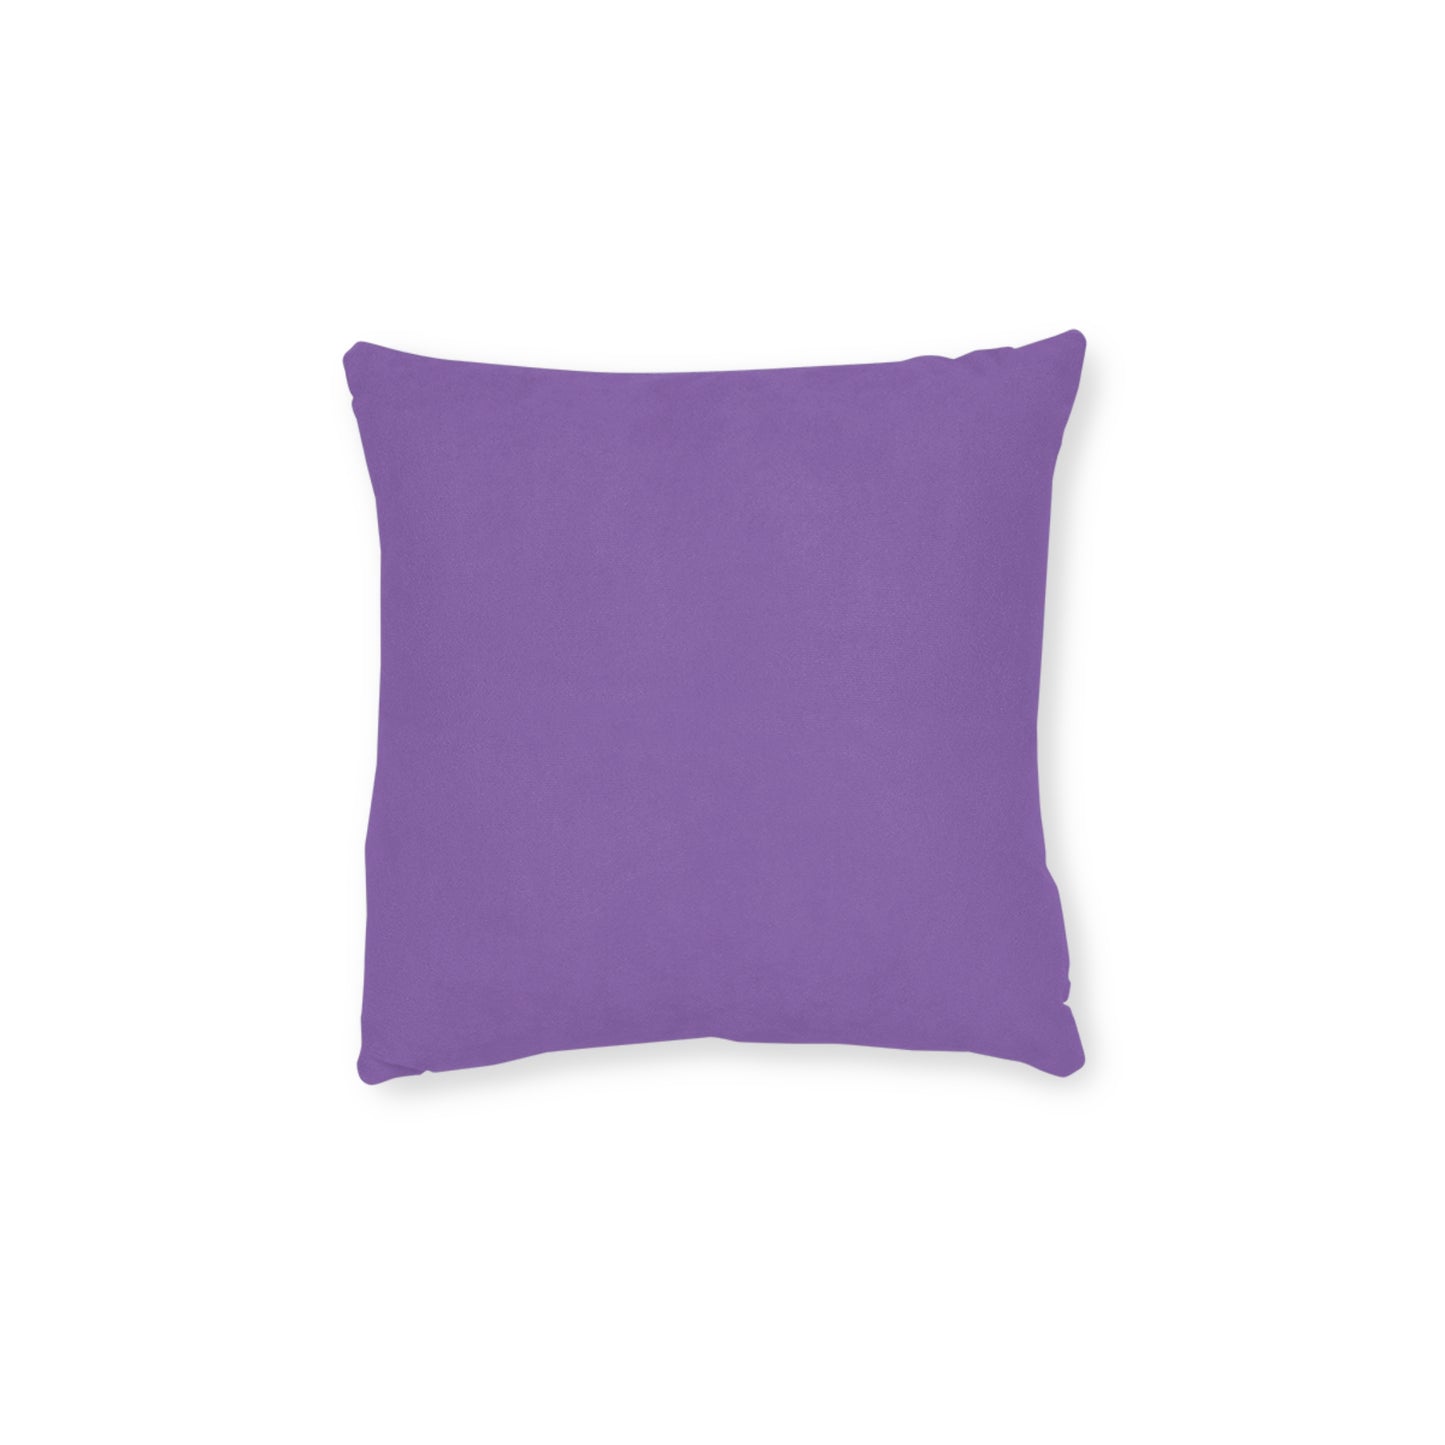 Coding In Progress Stay Away (Purple) - Square Pillow